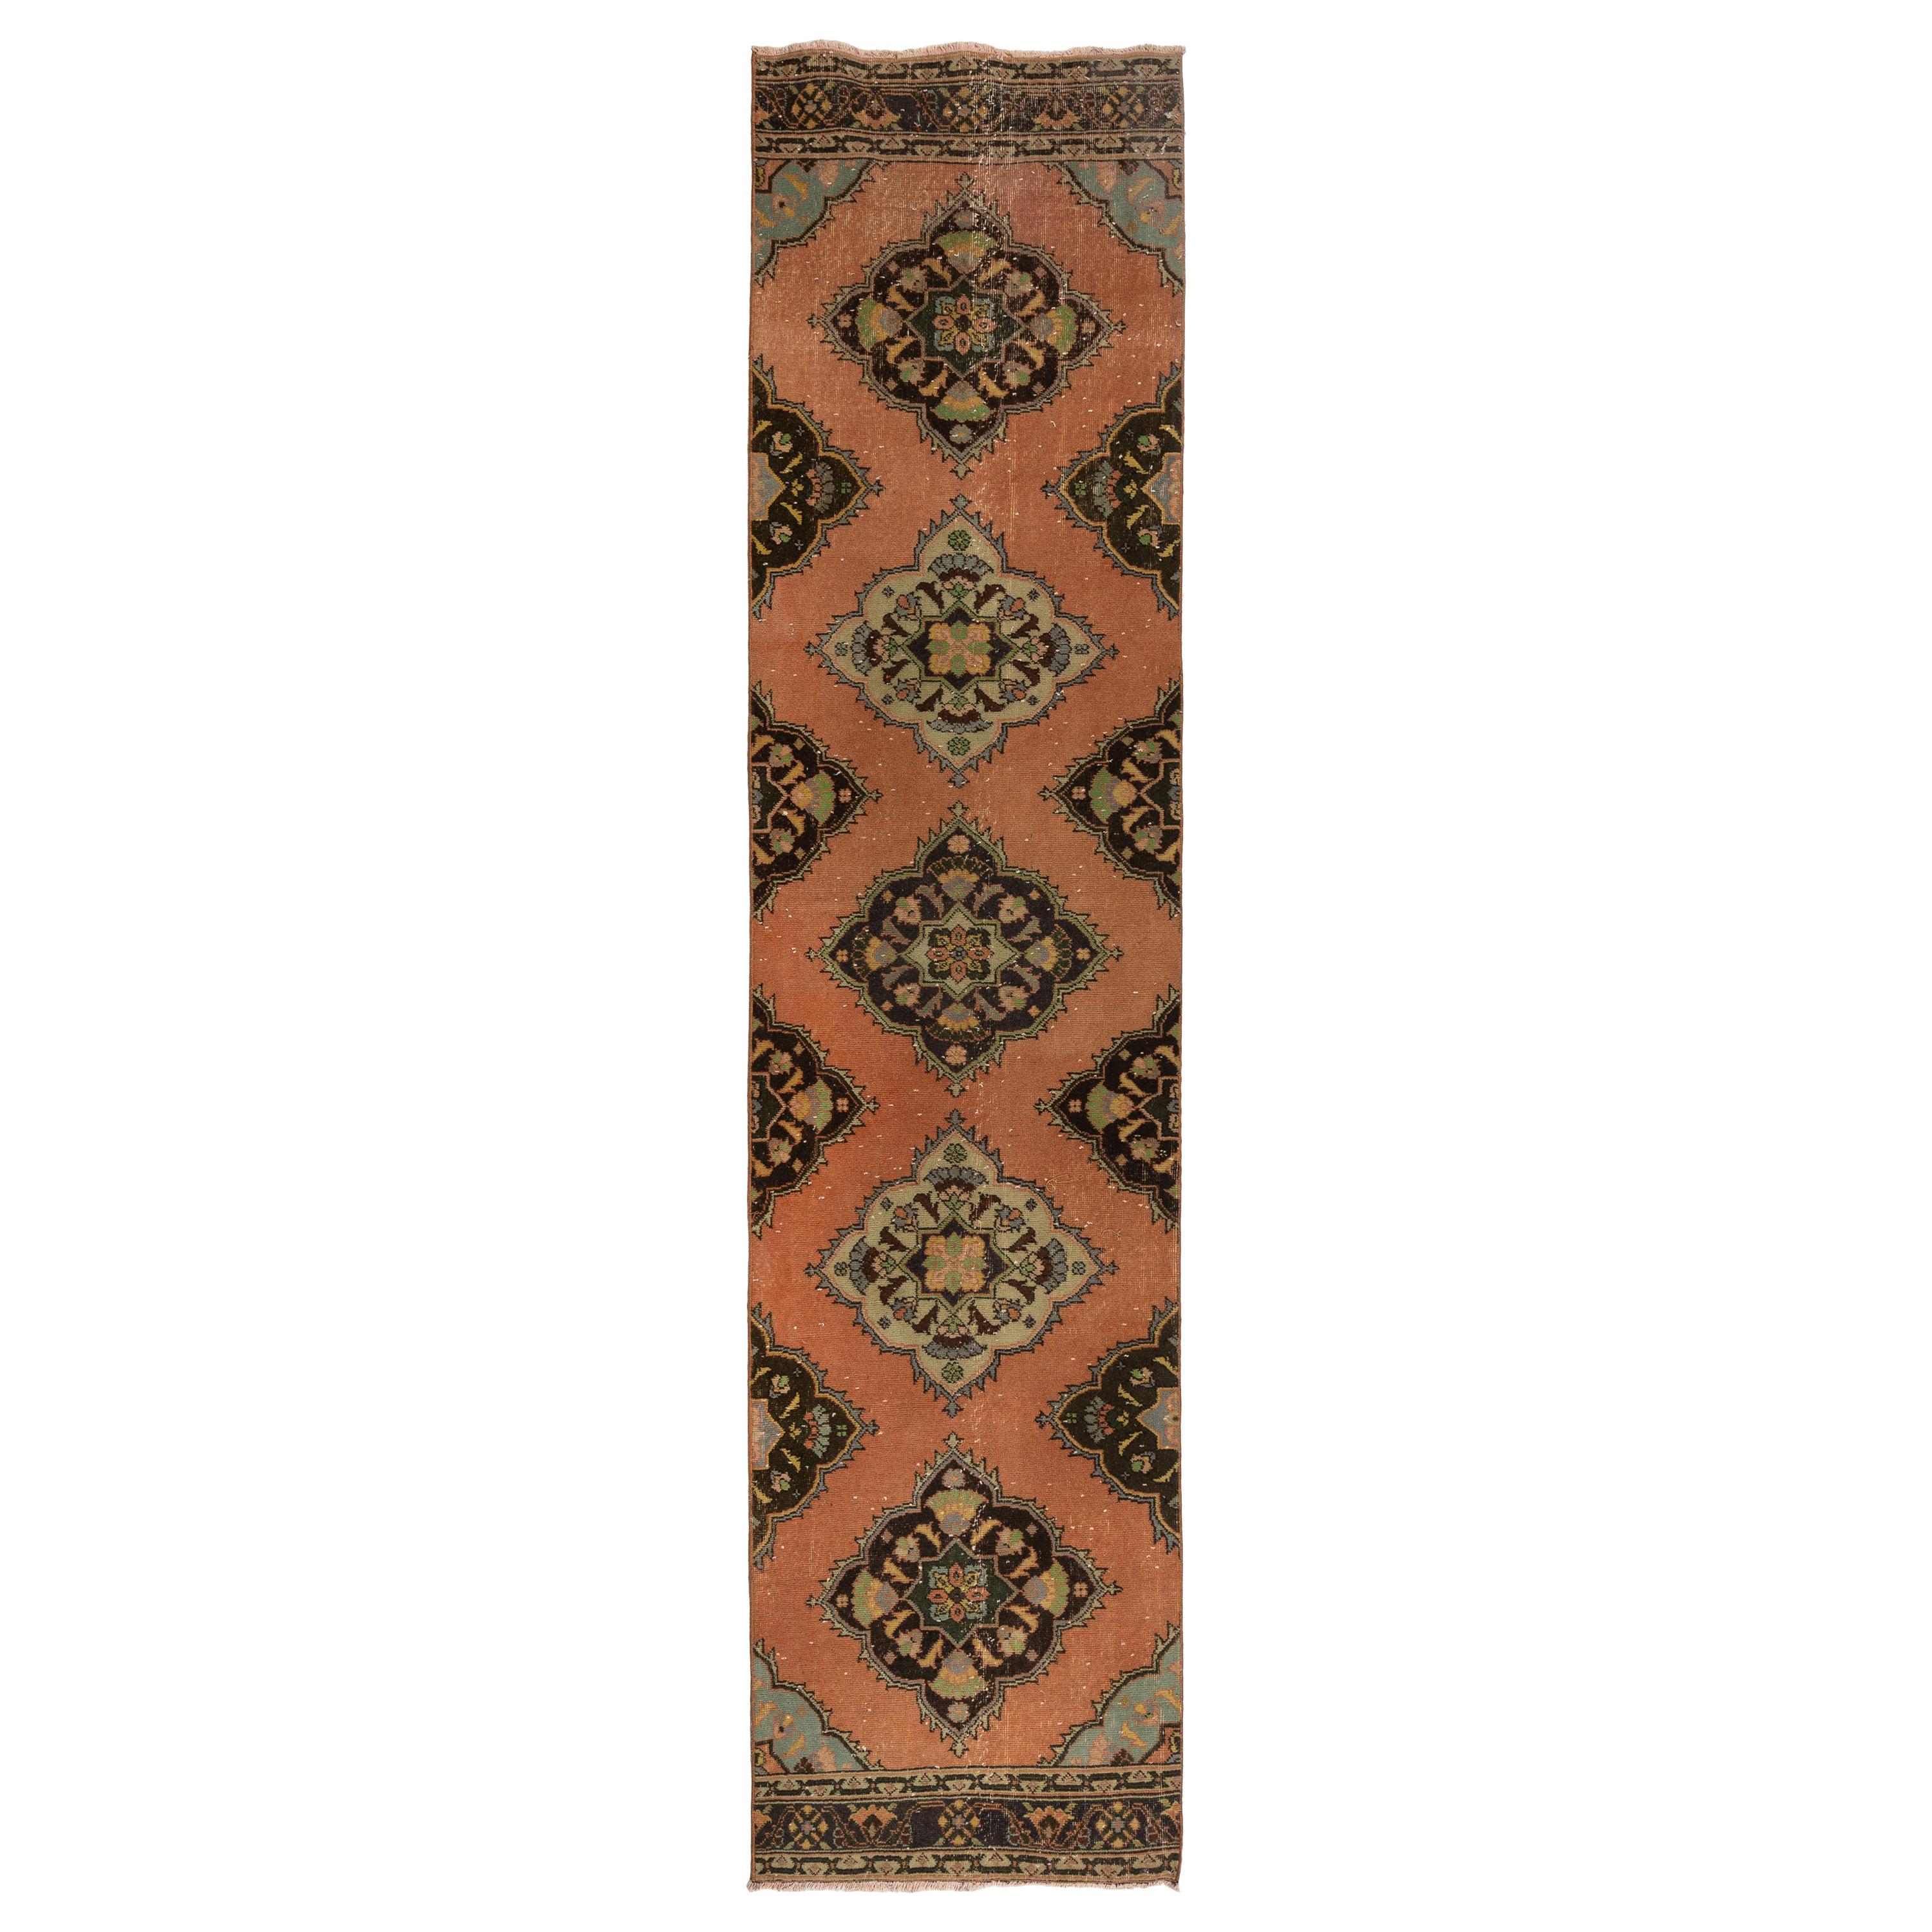 3x12.7 Ft Vintage Anatolian Village Runner Rug, 100% Wool Hand-Knotted Carpet For Sale